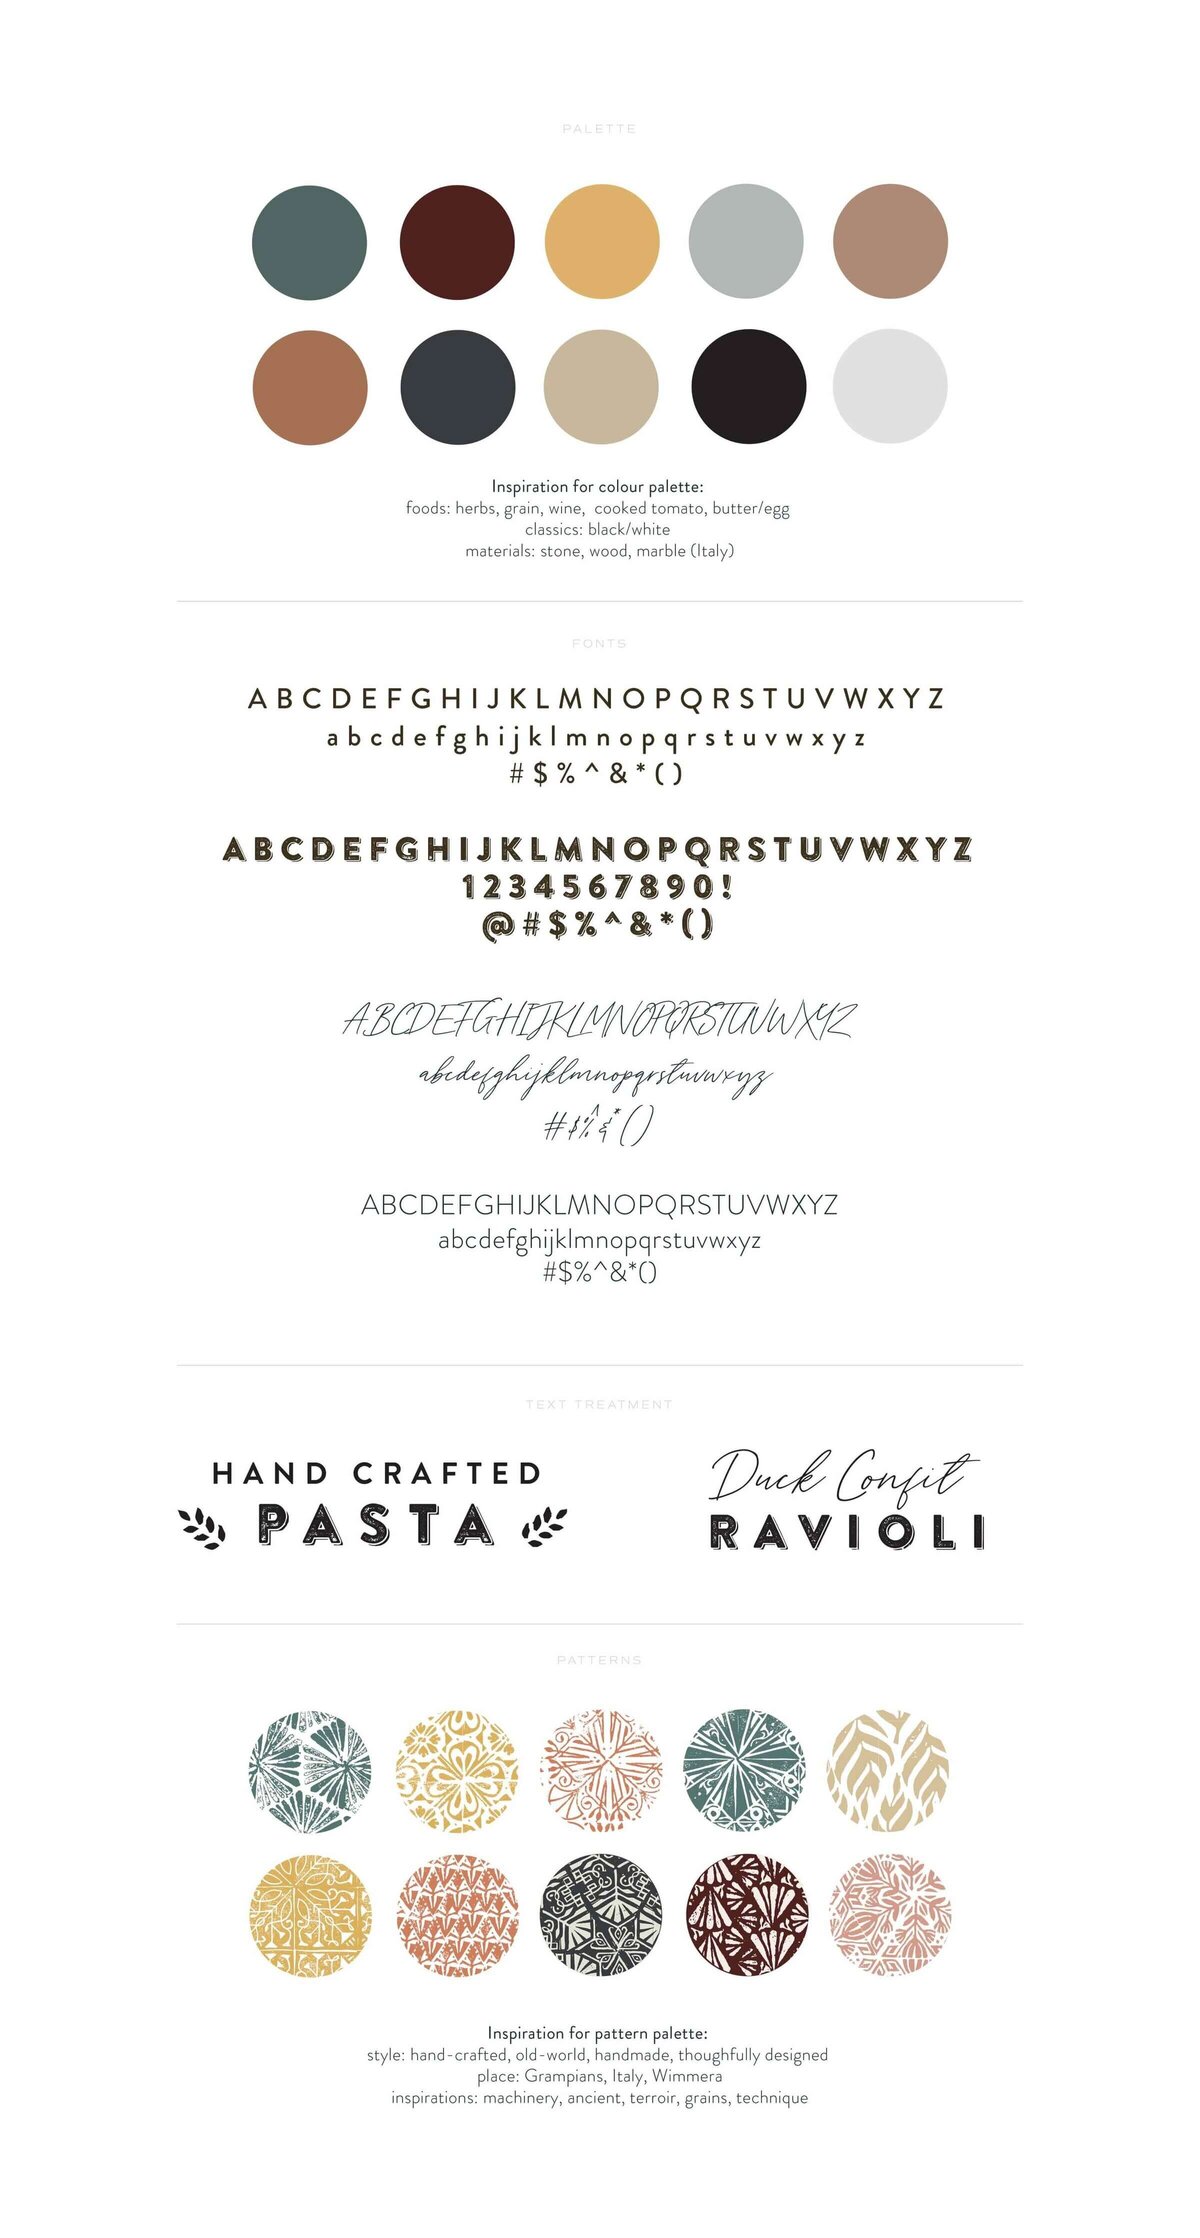 Brand guidelines neutral colour palette, minimalist font choices , font variations and brand patterns